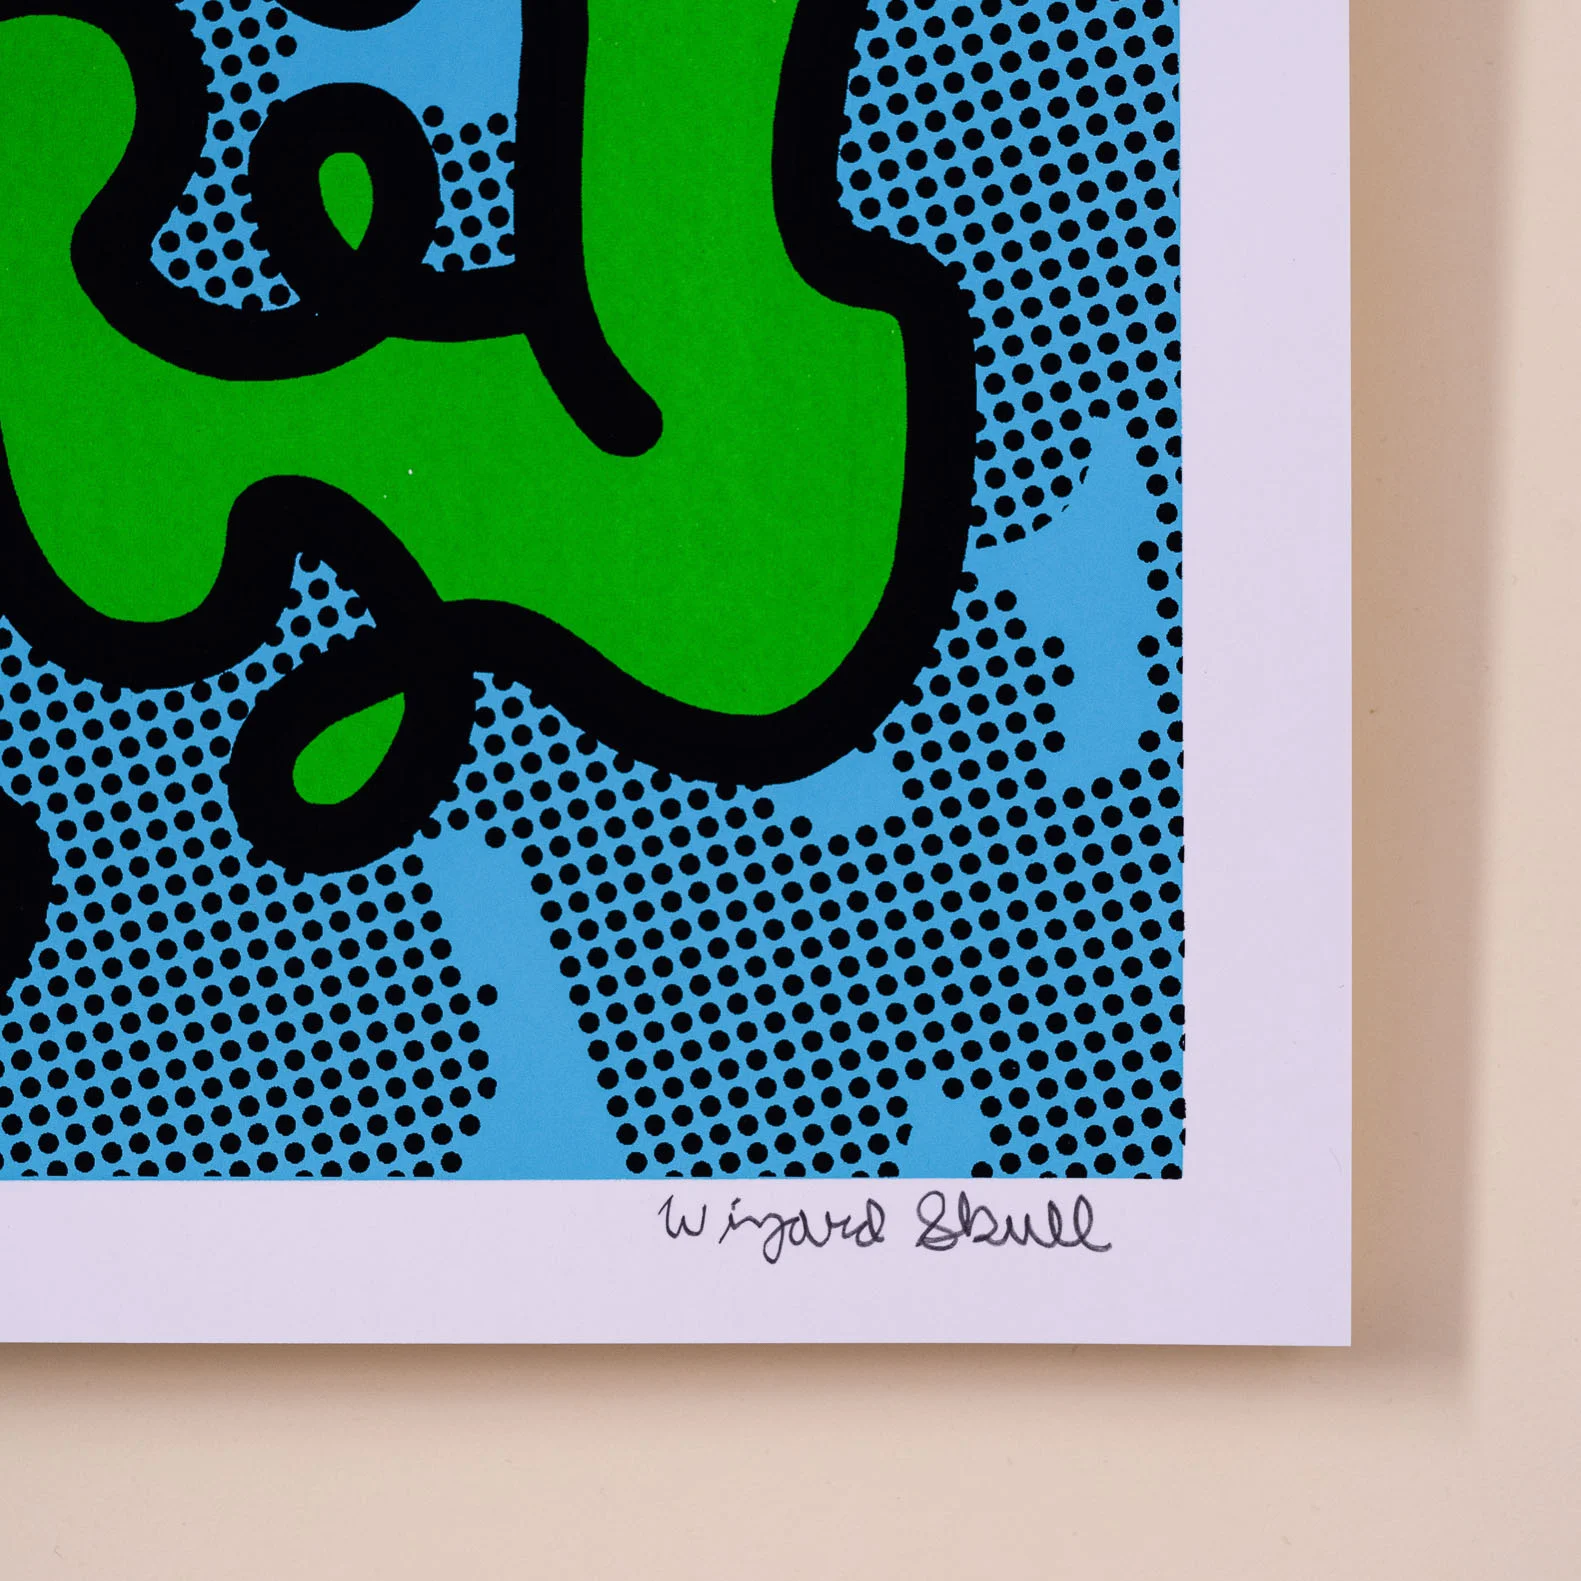 Detail and artist Wizard Skull signature of Muppets Kermit the Frog with wobbly lines as a screen print edition